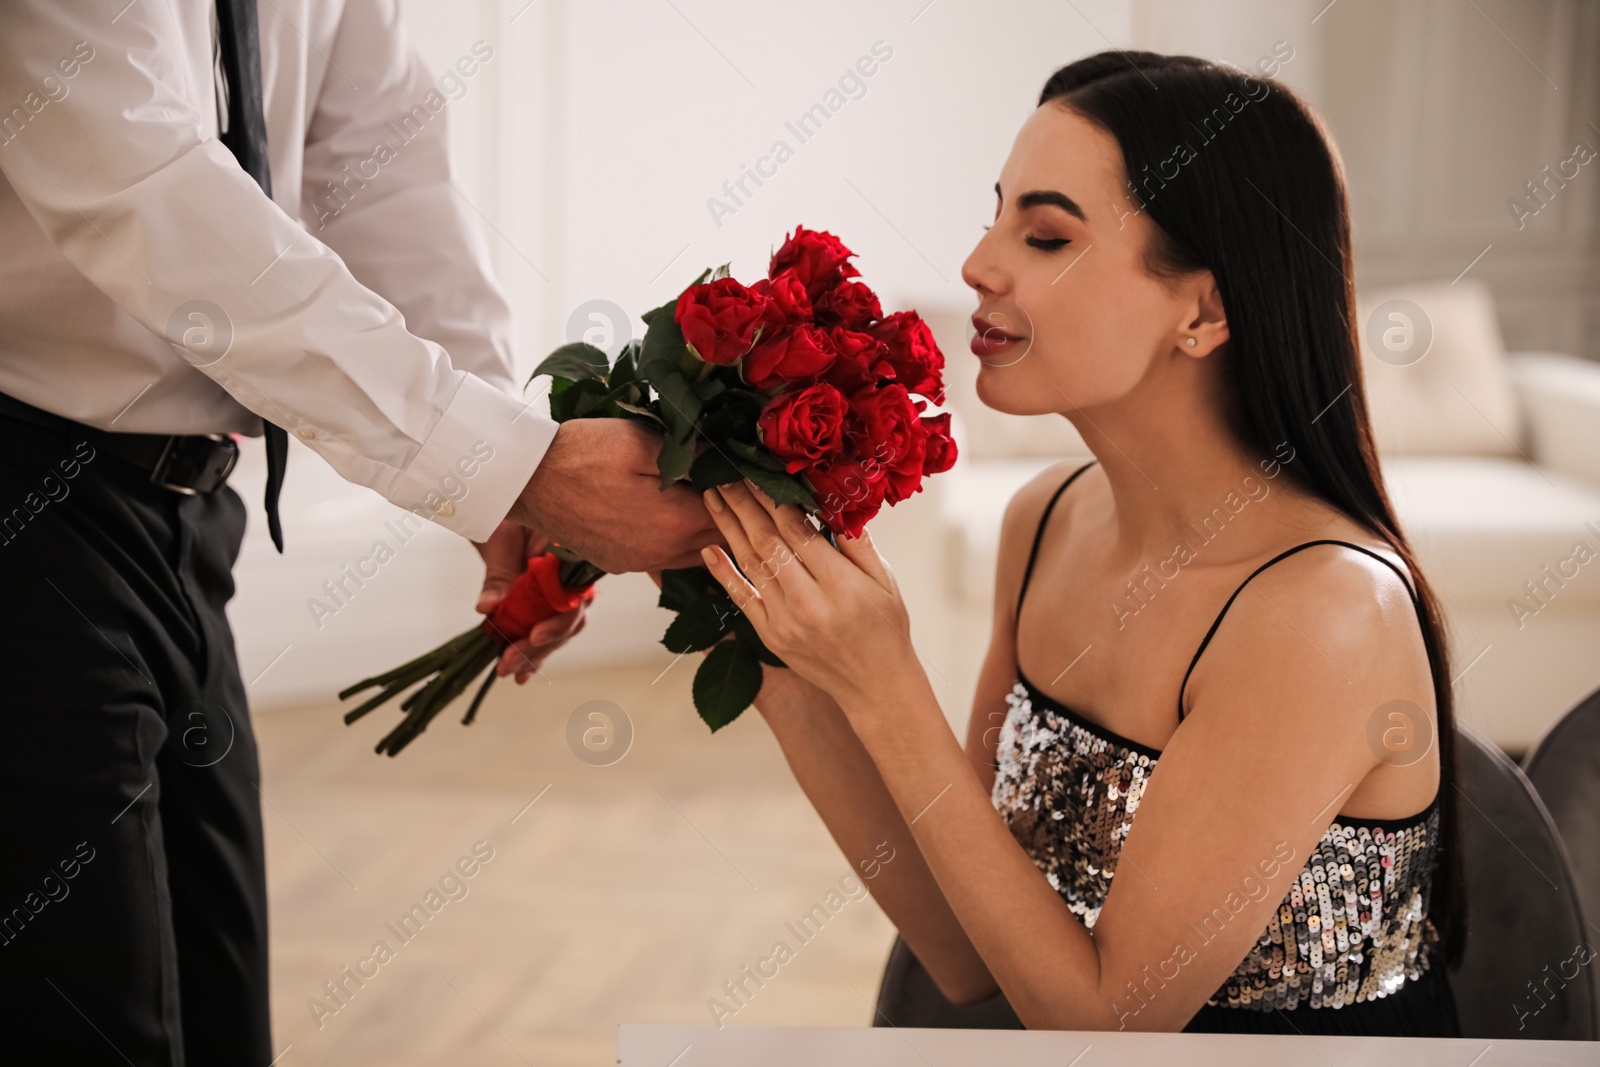 Photo of Man presenting roses to his beloved woman indoors. Valentine's day celebration